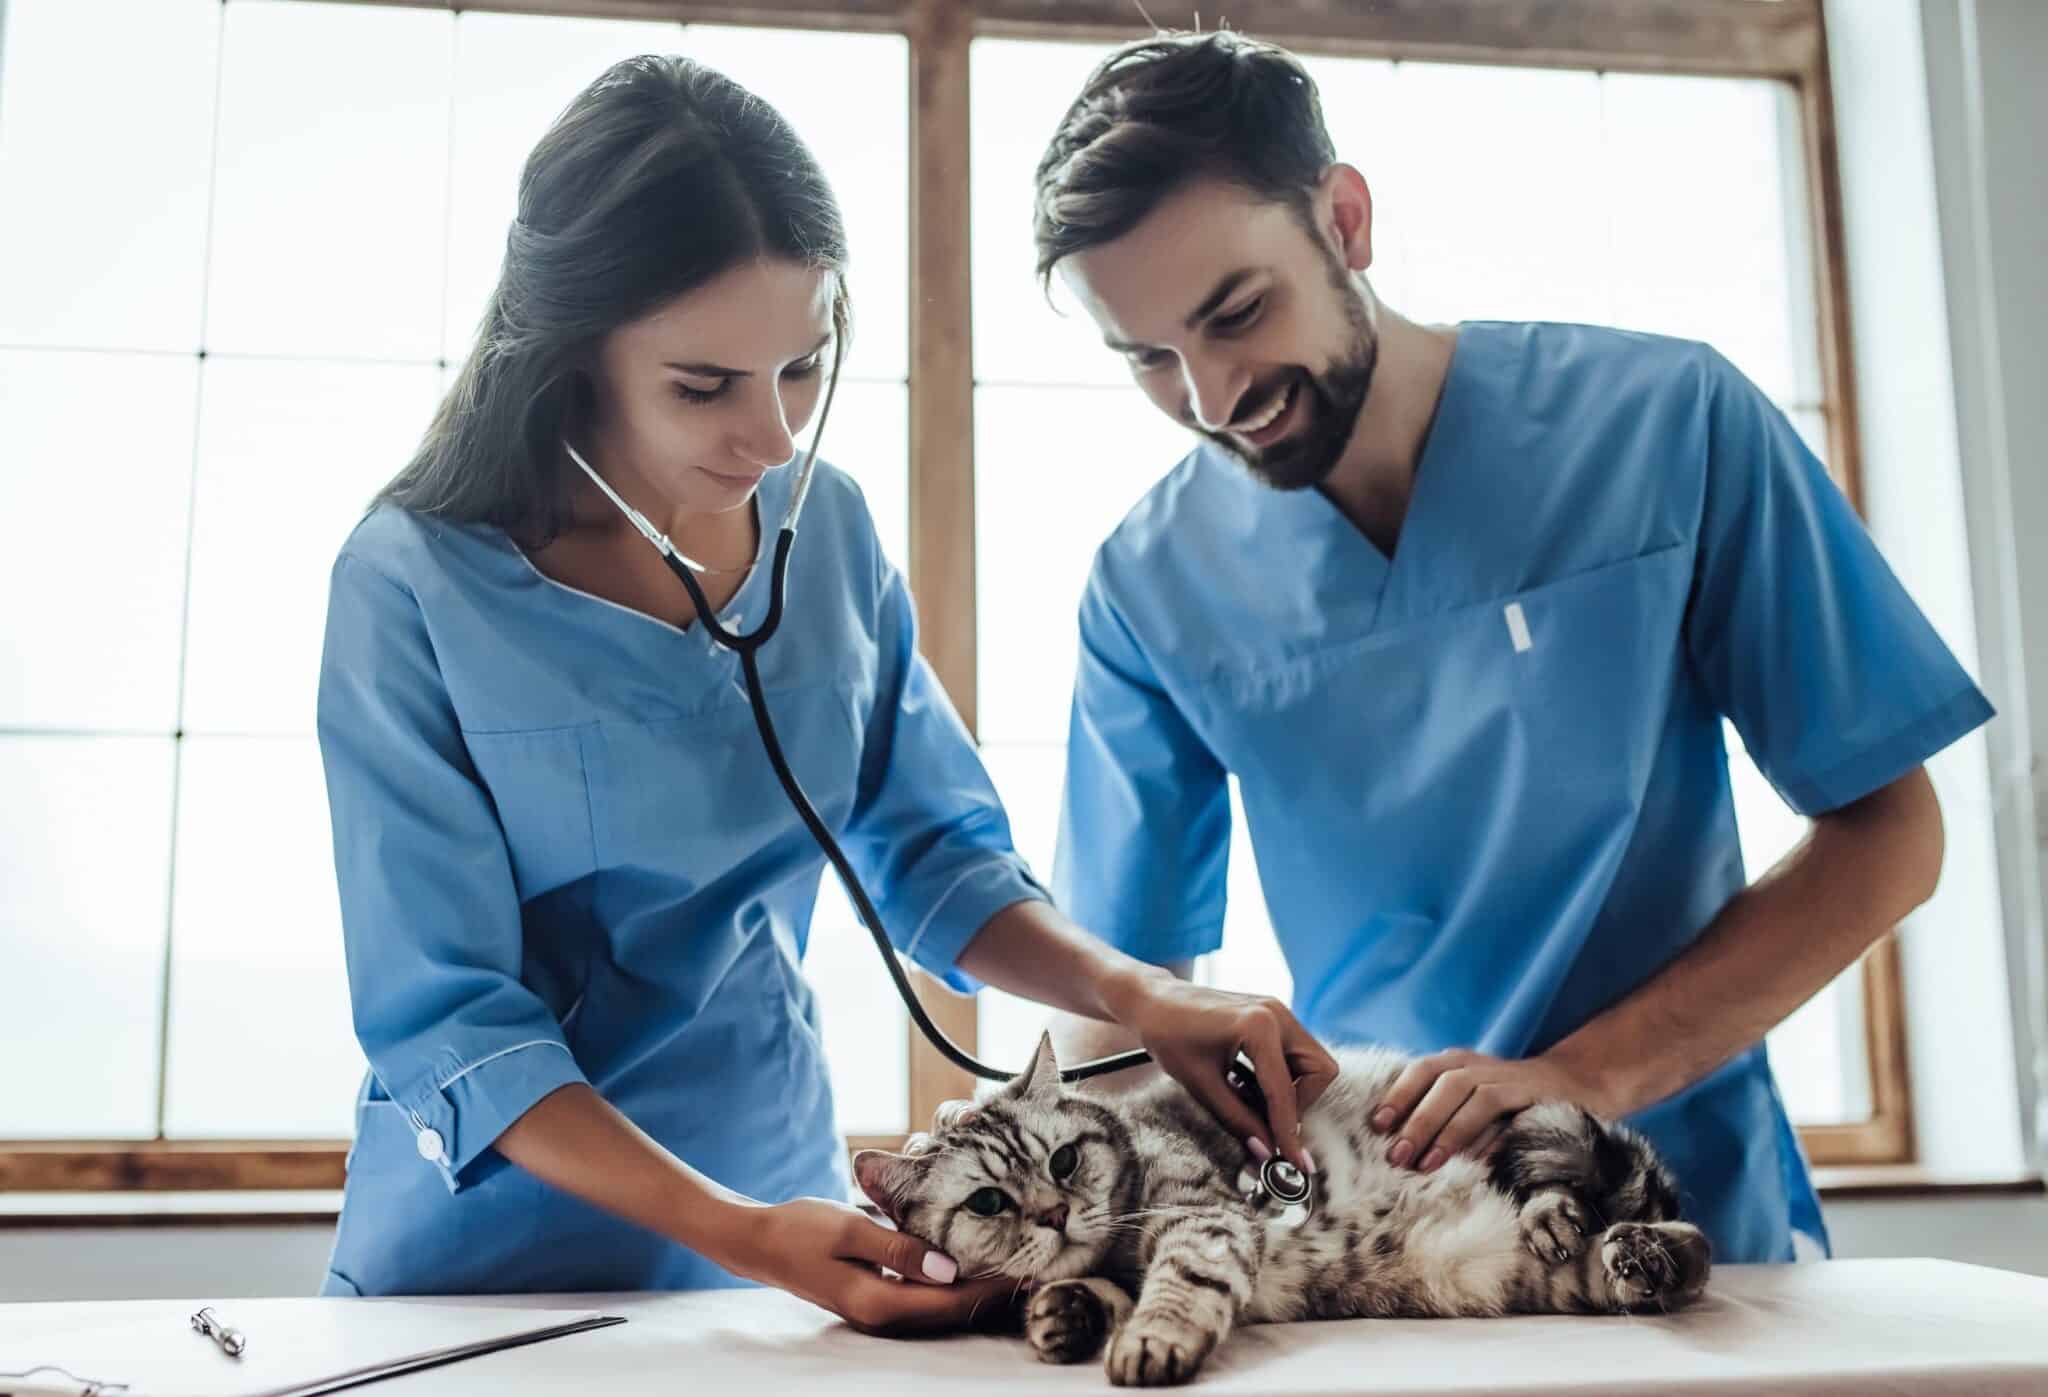 Vet assistant jobs in washington state